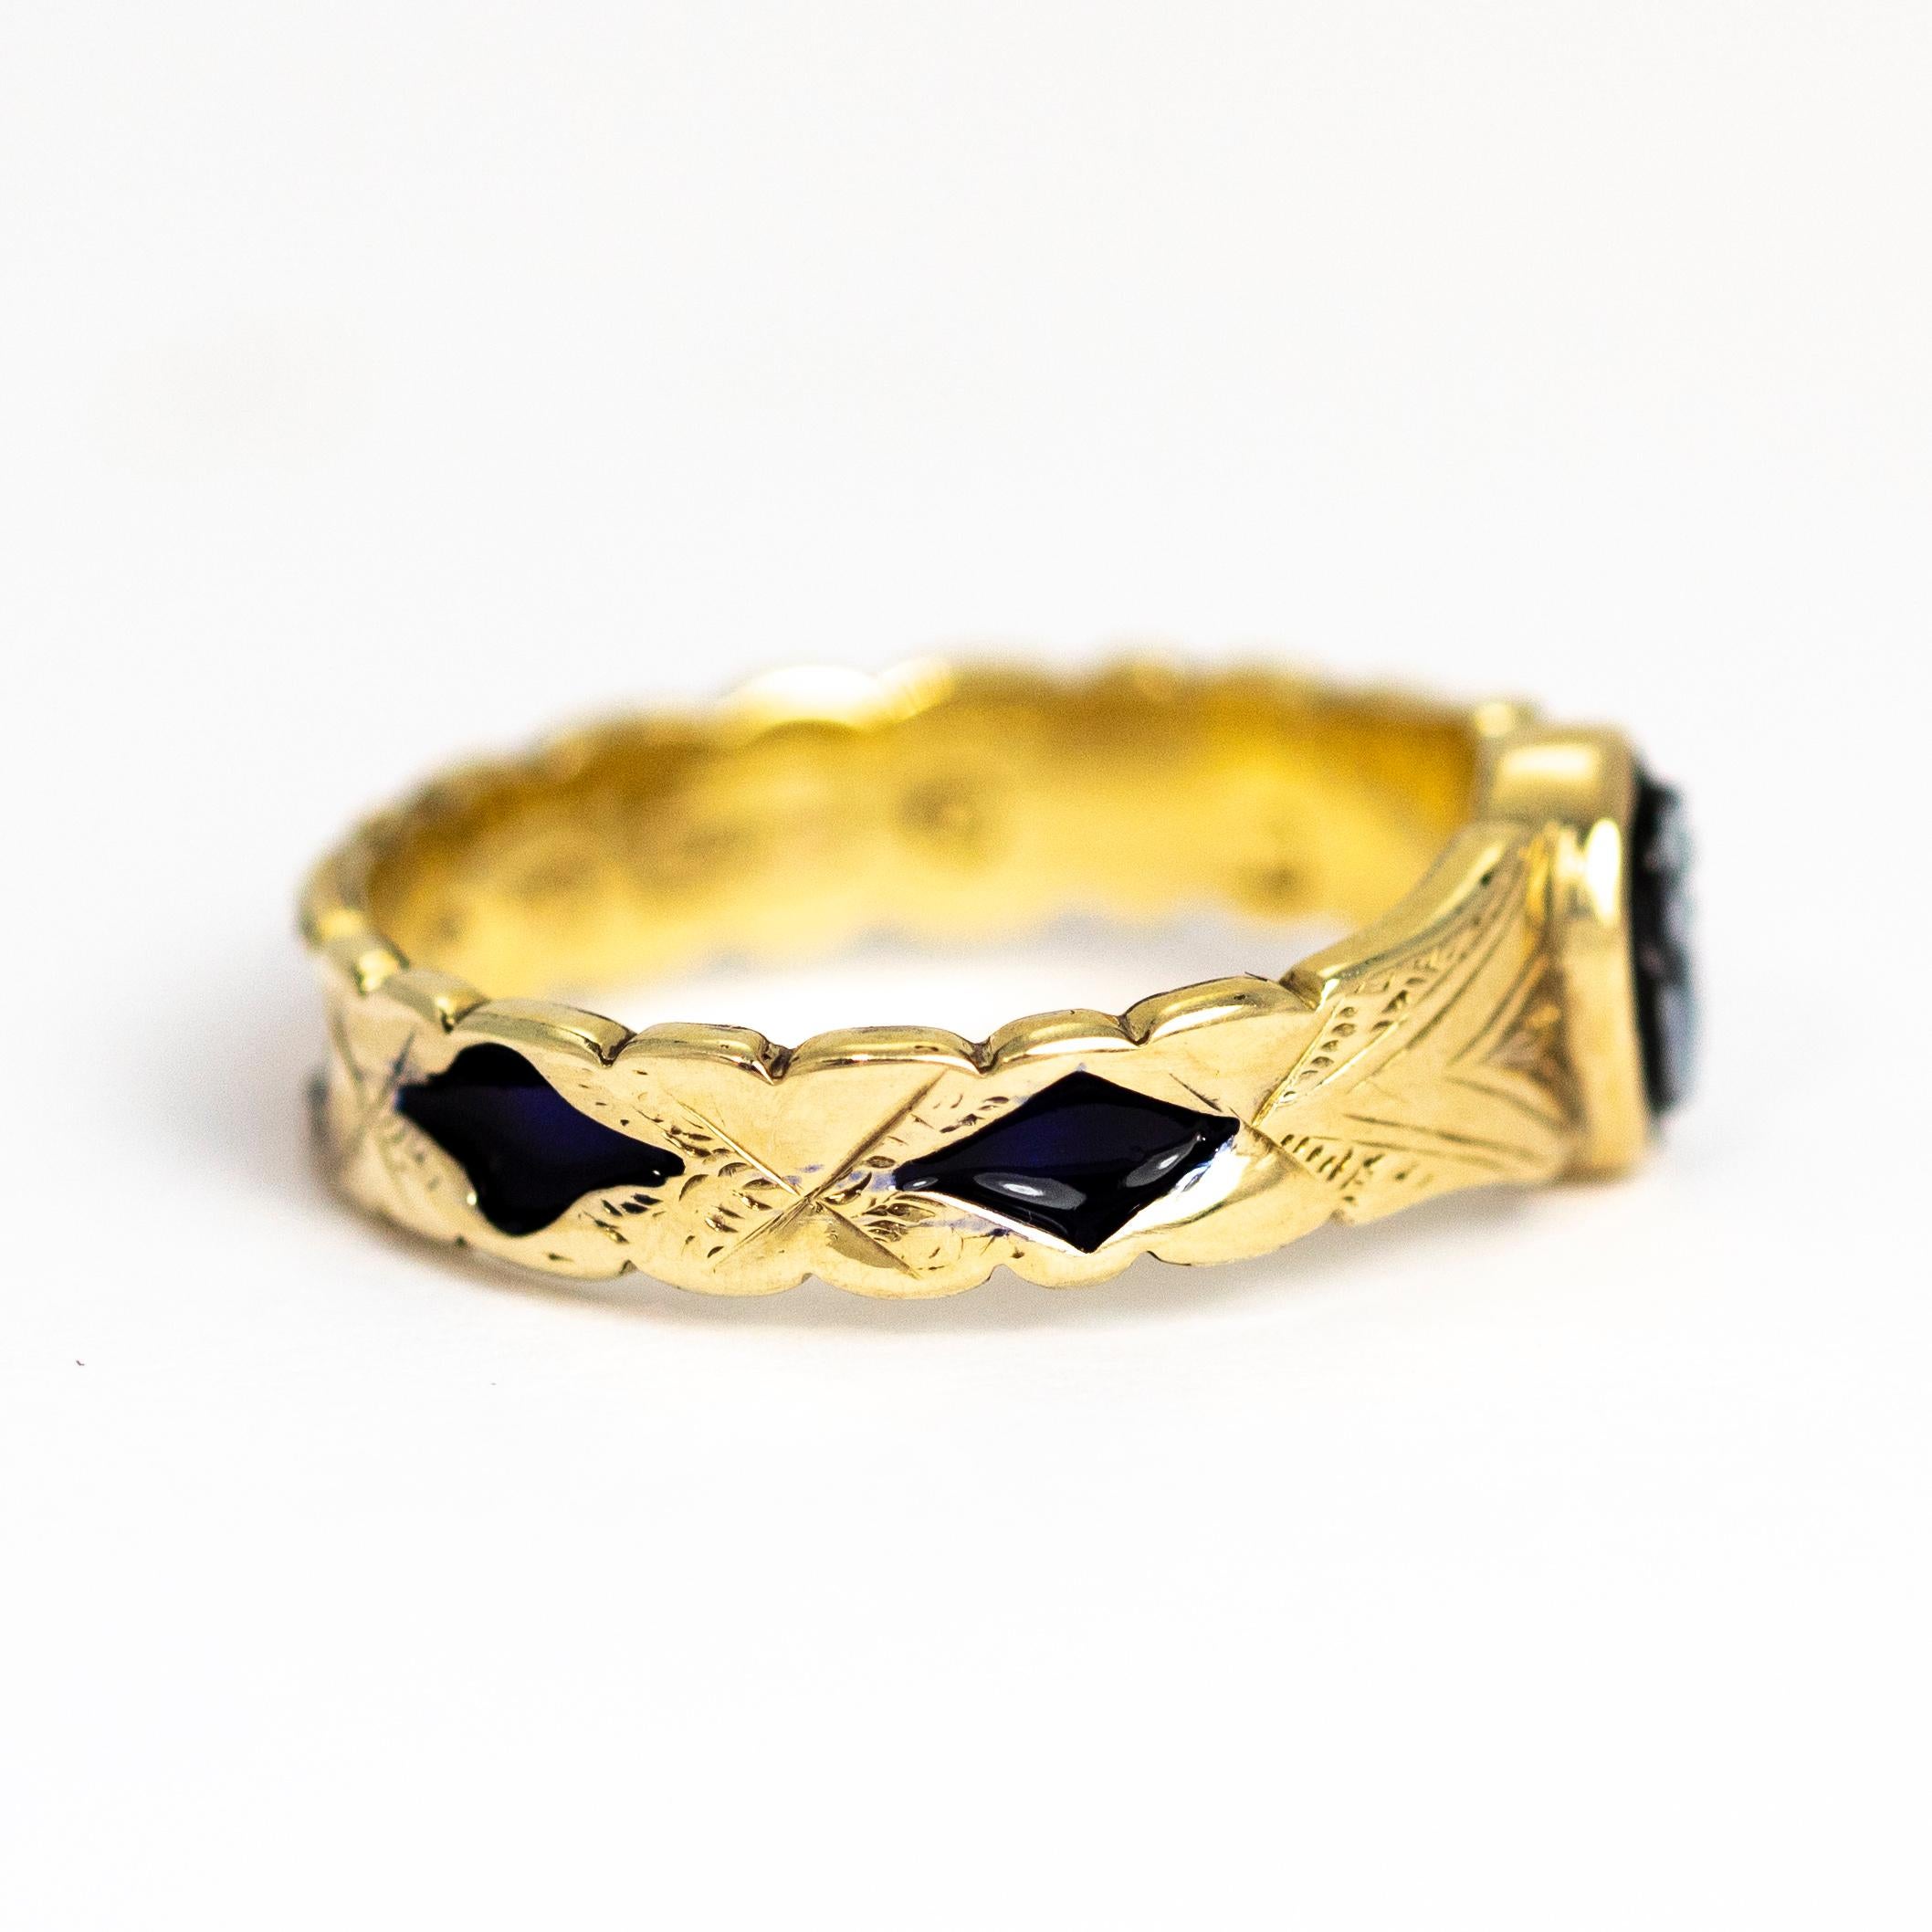 Women's or Men's Mid-19th Century Forget Me Not Sardonyx Mourning Ring